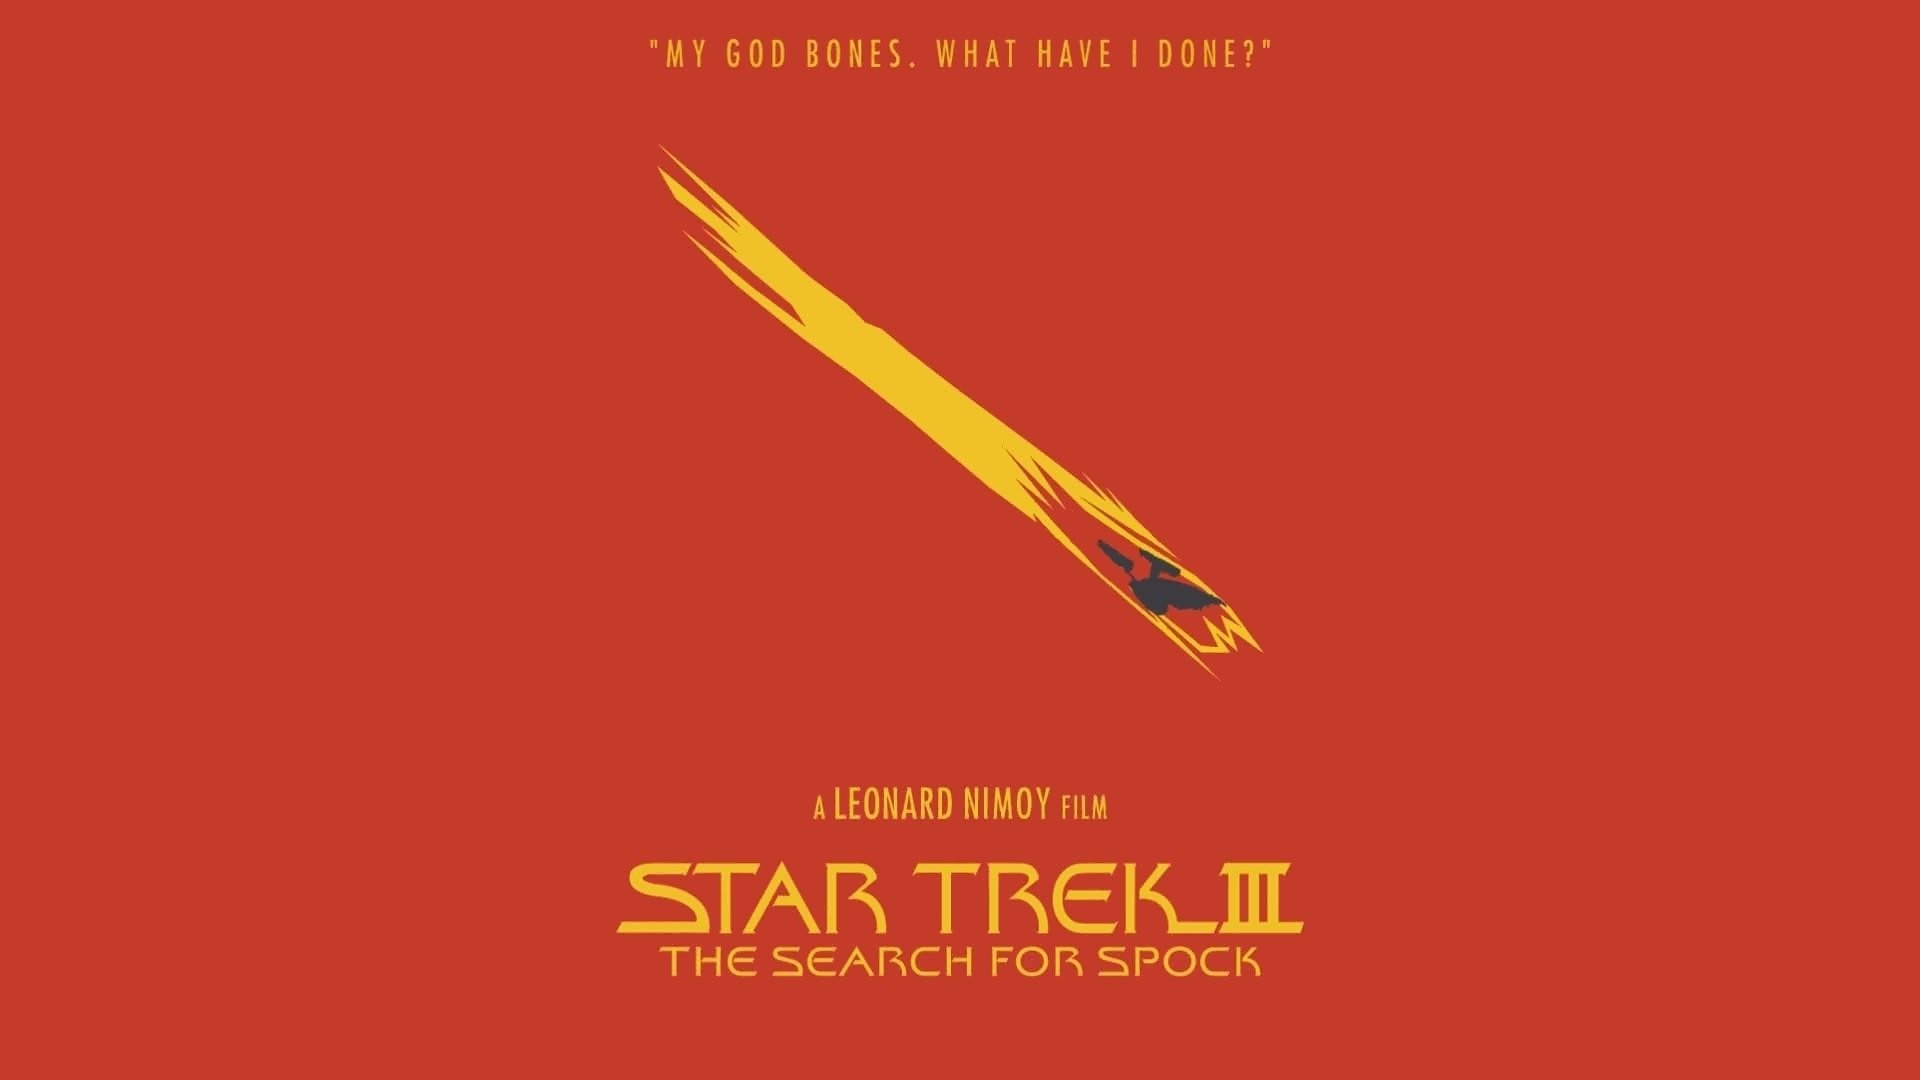 1920x1080 Movie - Star Trek III: The Search for Spock Wallpaper